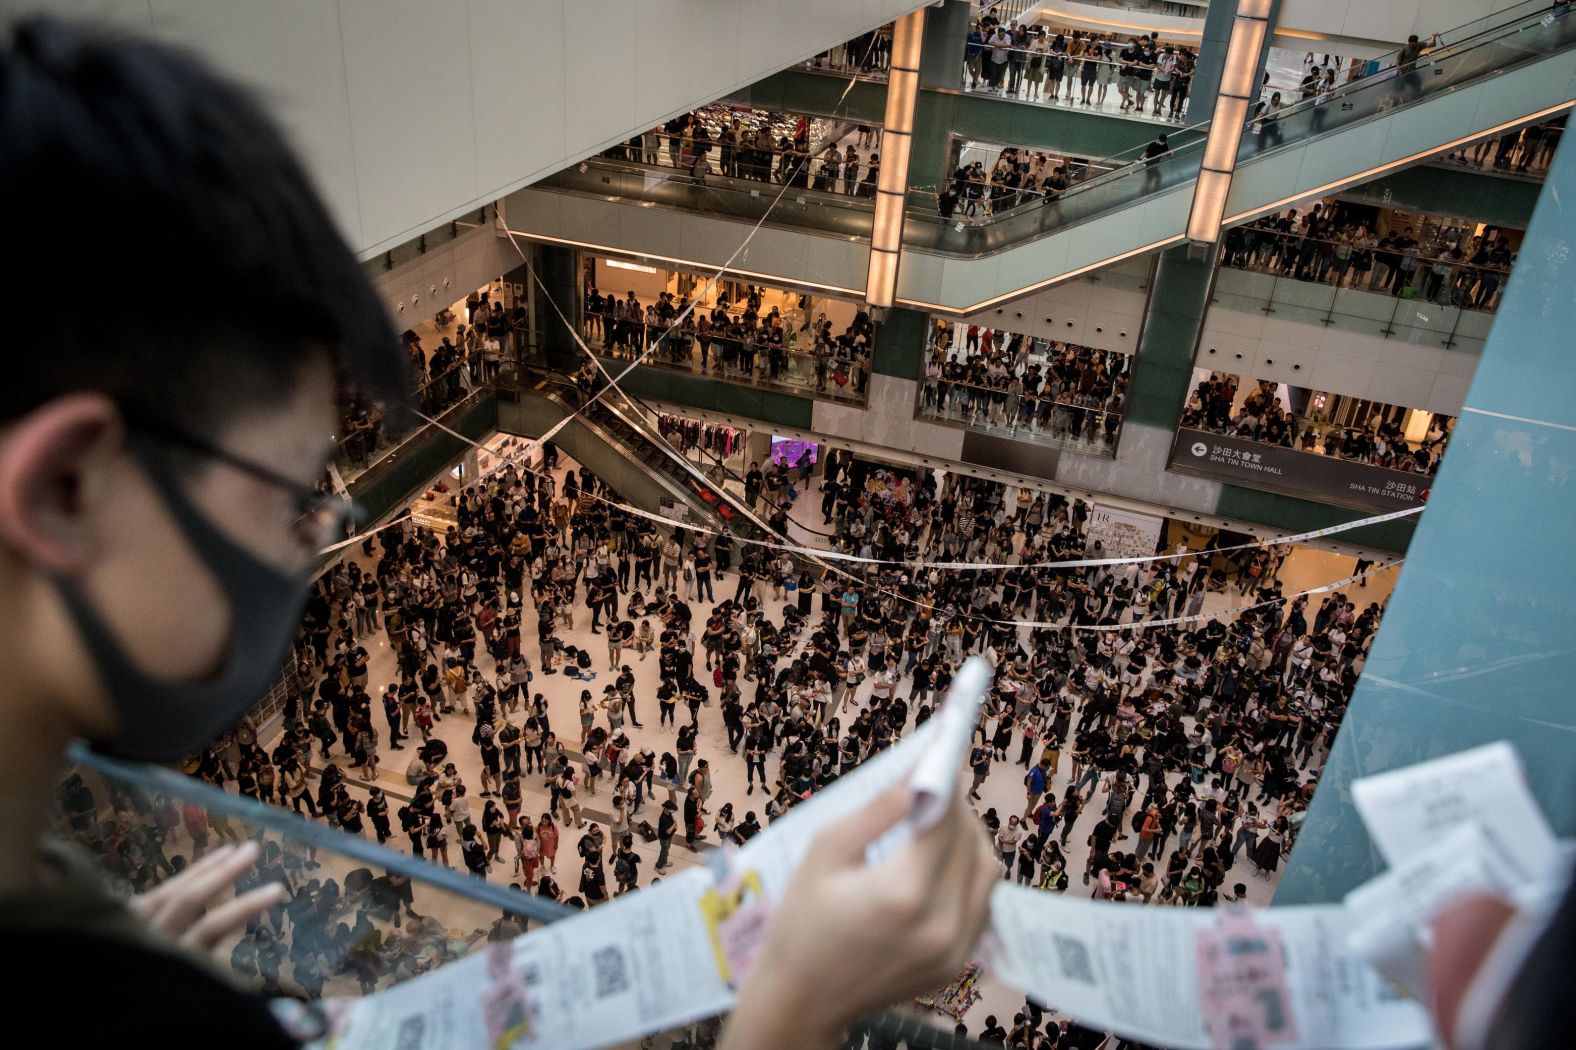 Pro-democracy protesters sing songs and chant slogans during a rally inside a shopping mall on September 22.